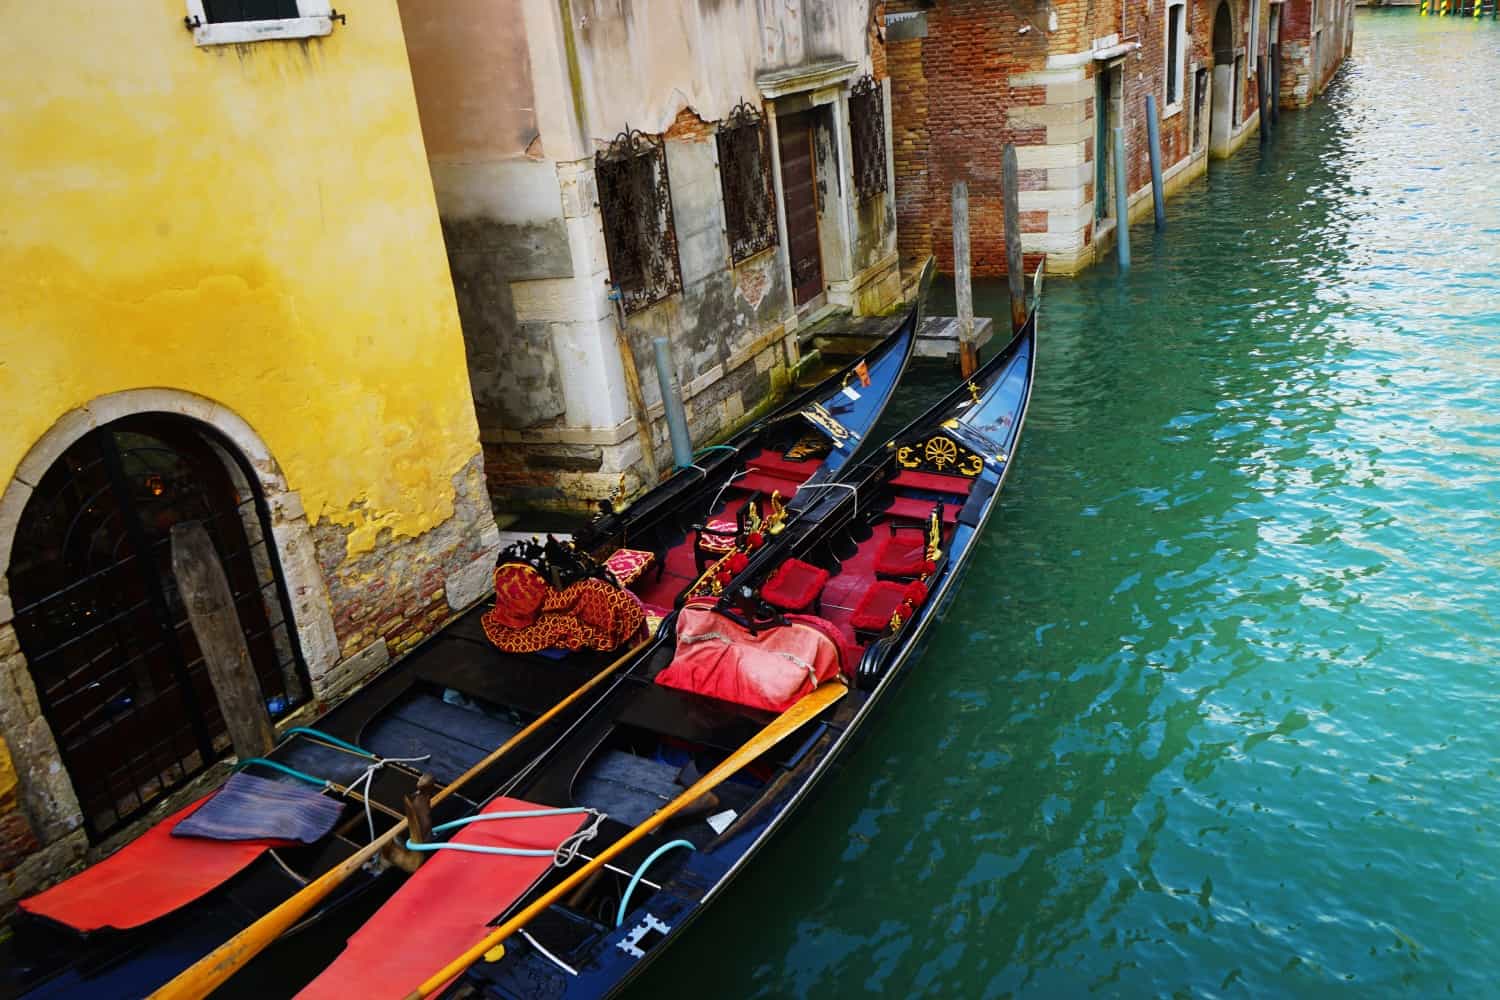 Gondolas on the canals in Venice